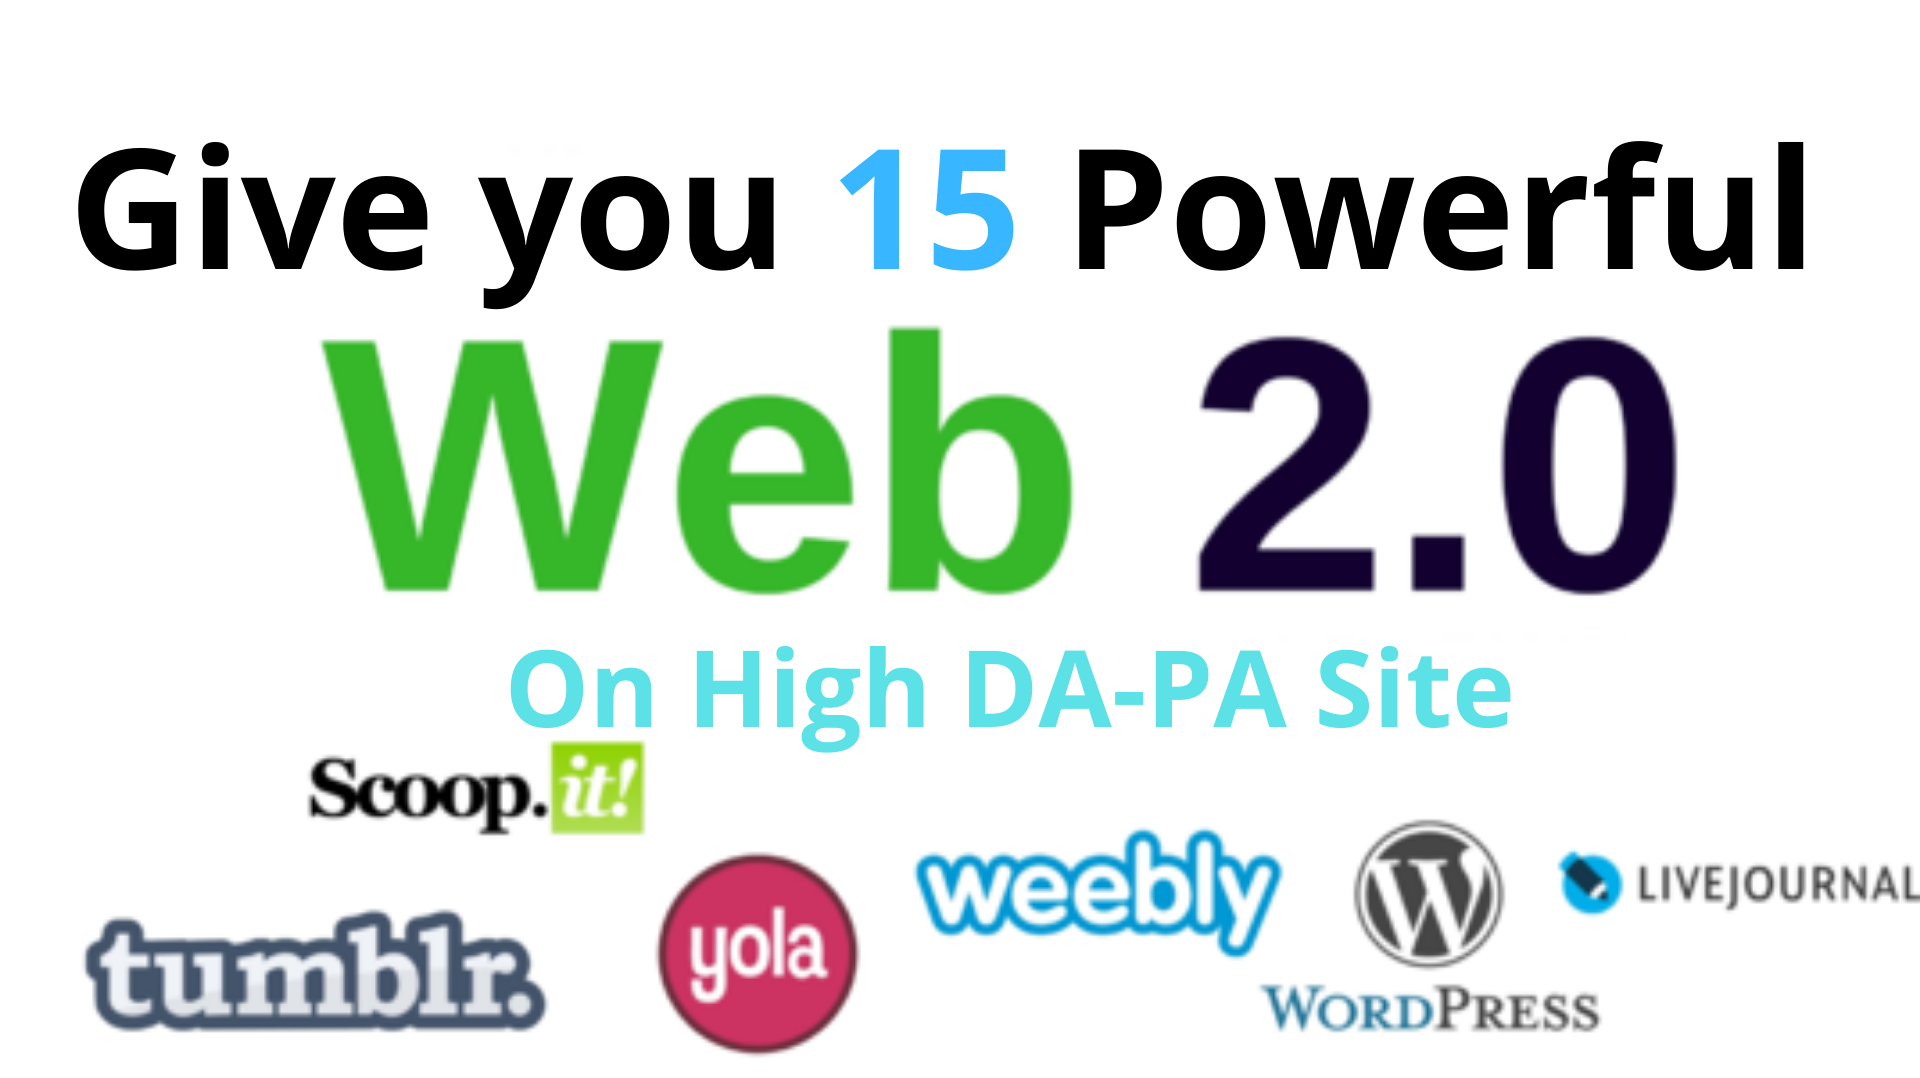 Give you 15 WEB2.0 to boost your Search Engine Rank